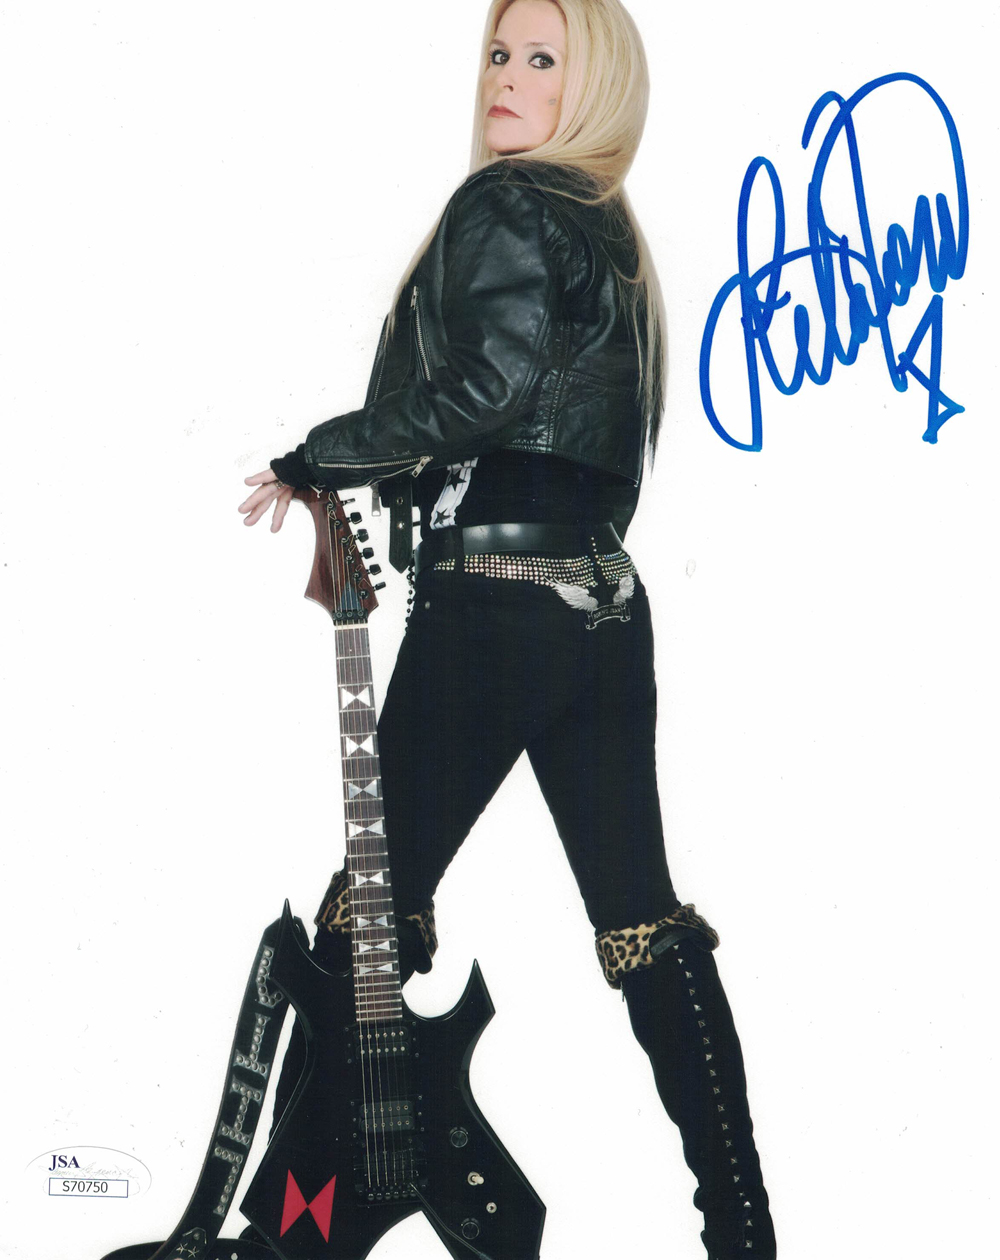 Lita Ford Autographed/Signed The Runaways 8x10 Photo JSA 30291